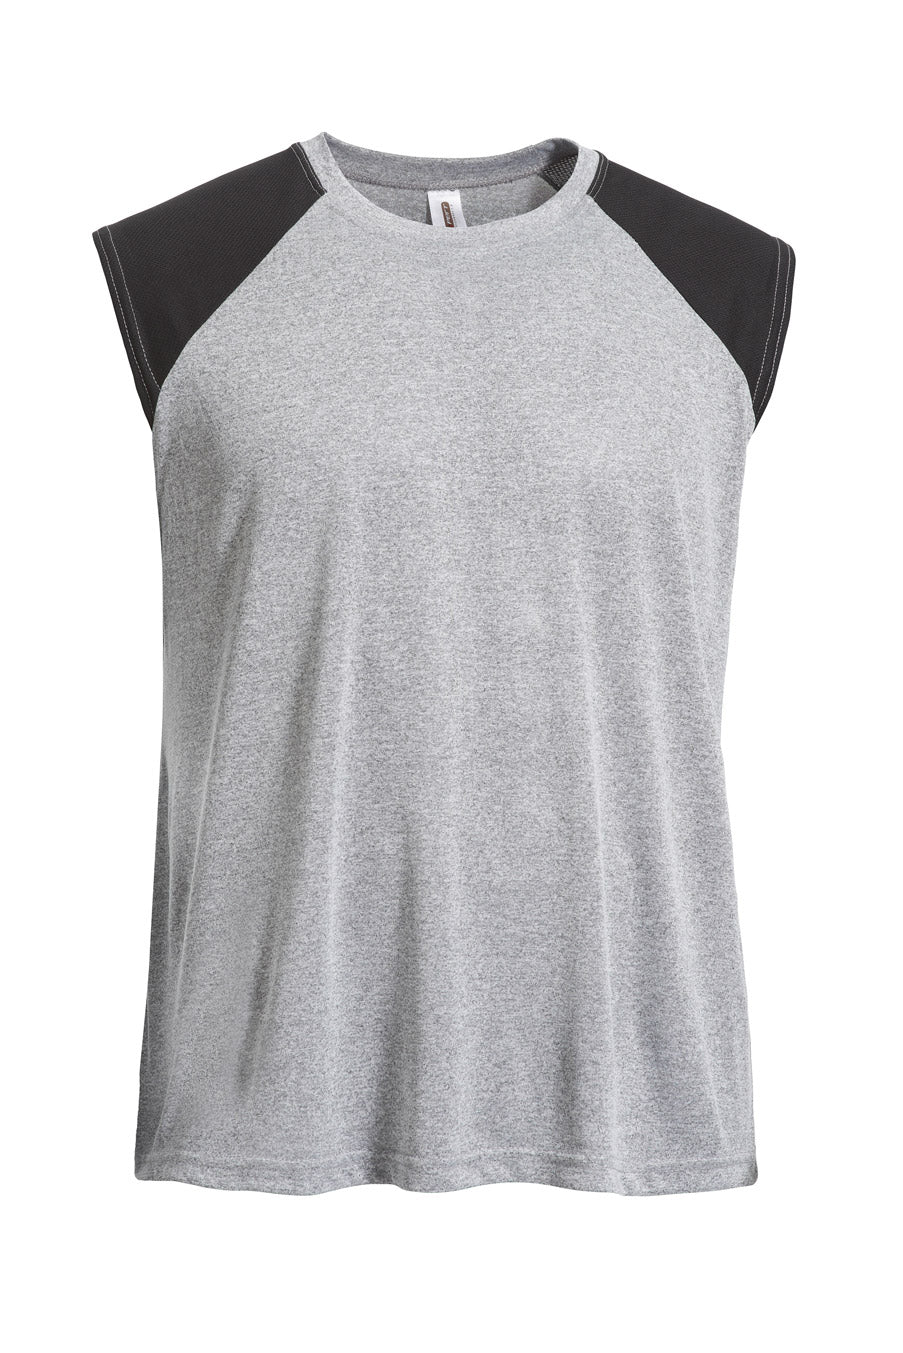 Natural Feel Jersey Colorblock Training Tank 🇺🇸 - Expert Brand Apparel#color_gray-heather-black